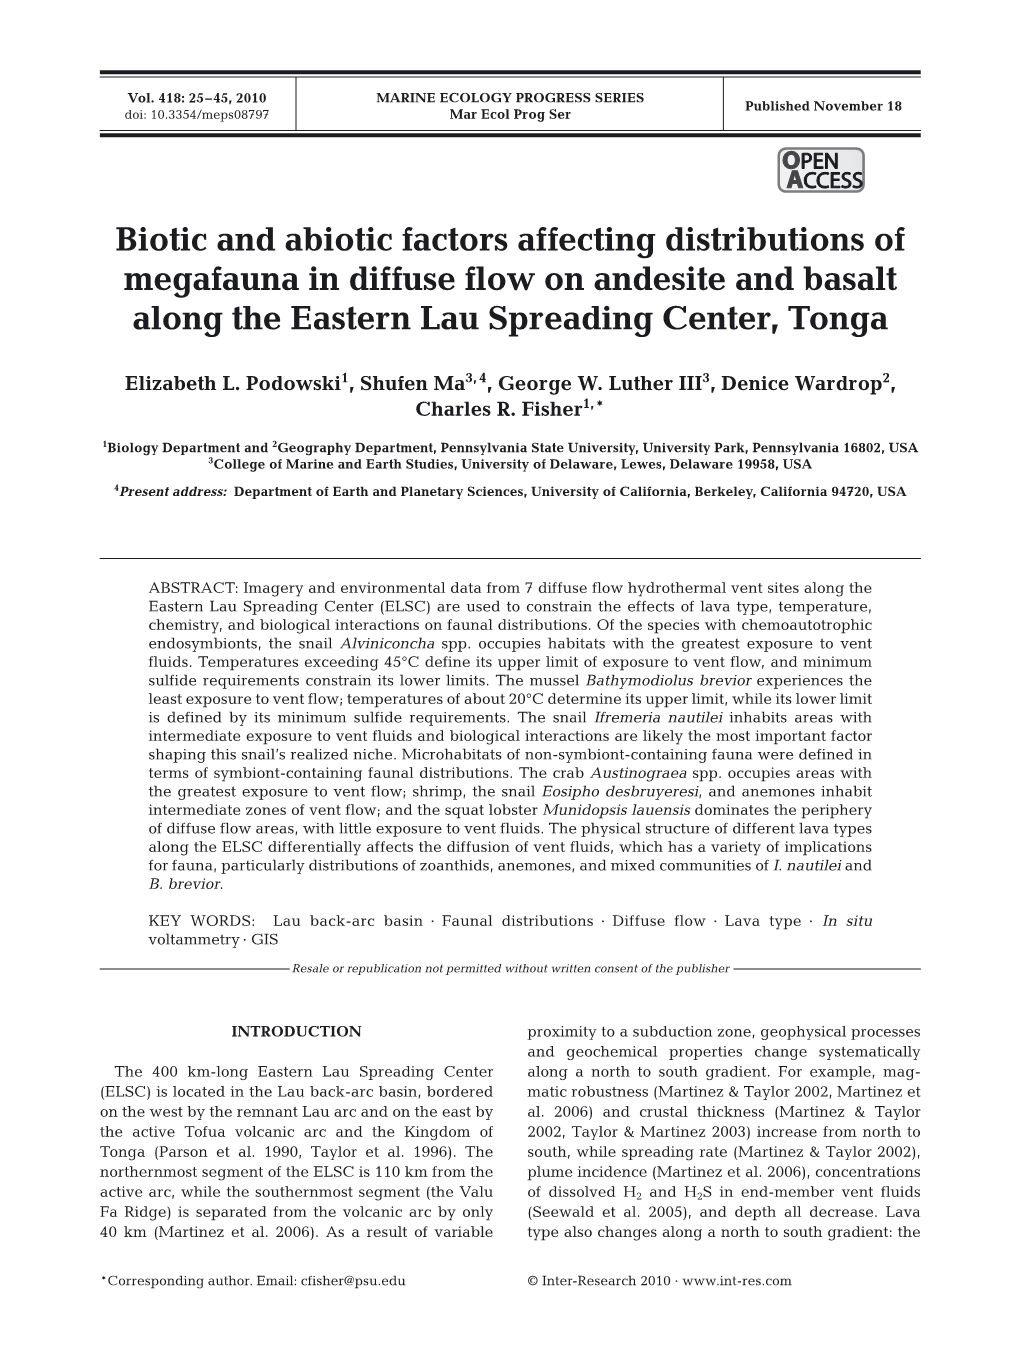 Biotic and Abiotic Factors Affecting Distributions of Megafauna in Diffuse Flow on Andesite and Basalt Along the Eastern Lau Spreading Center, Tonga